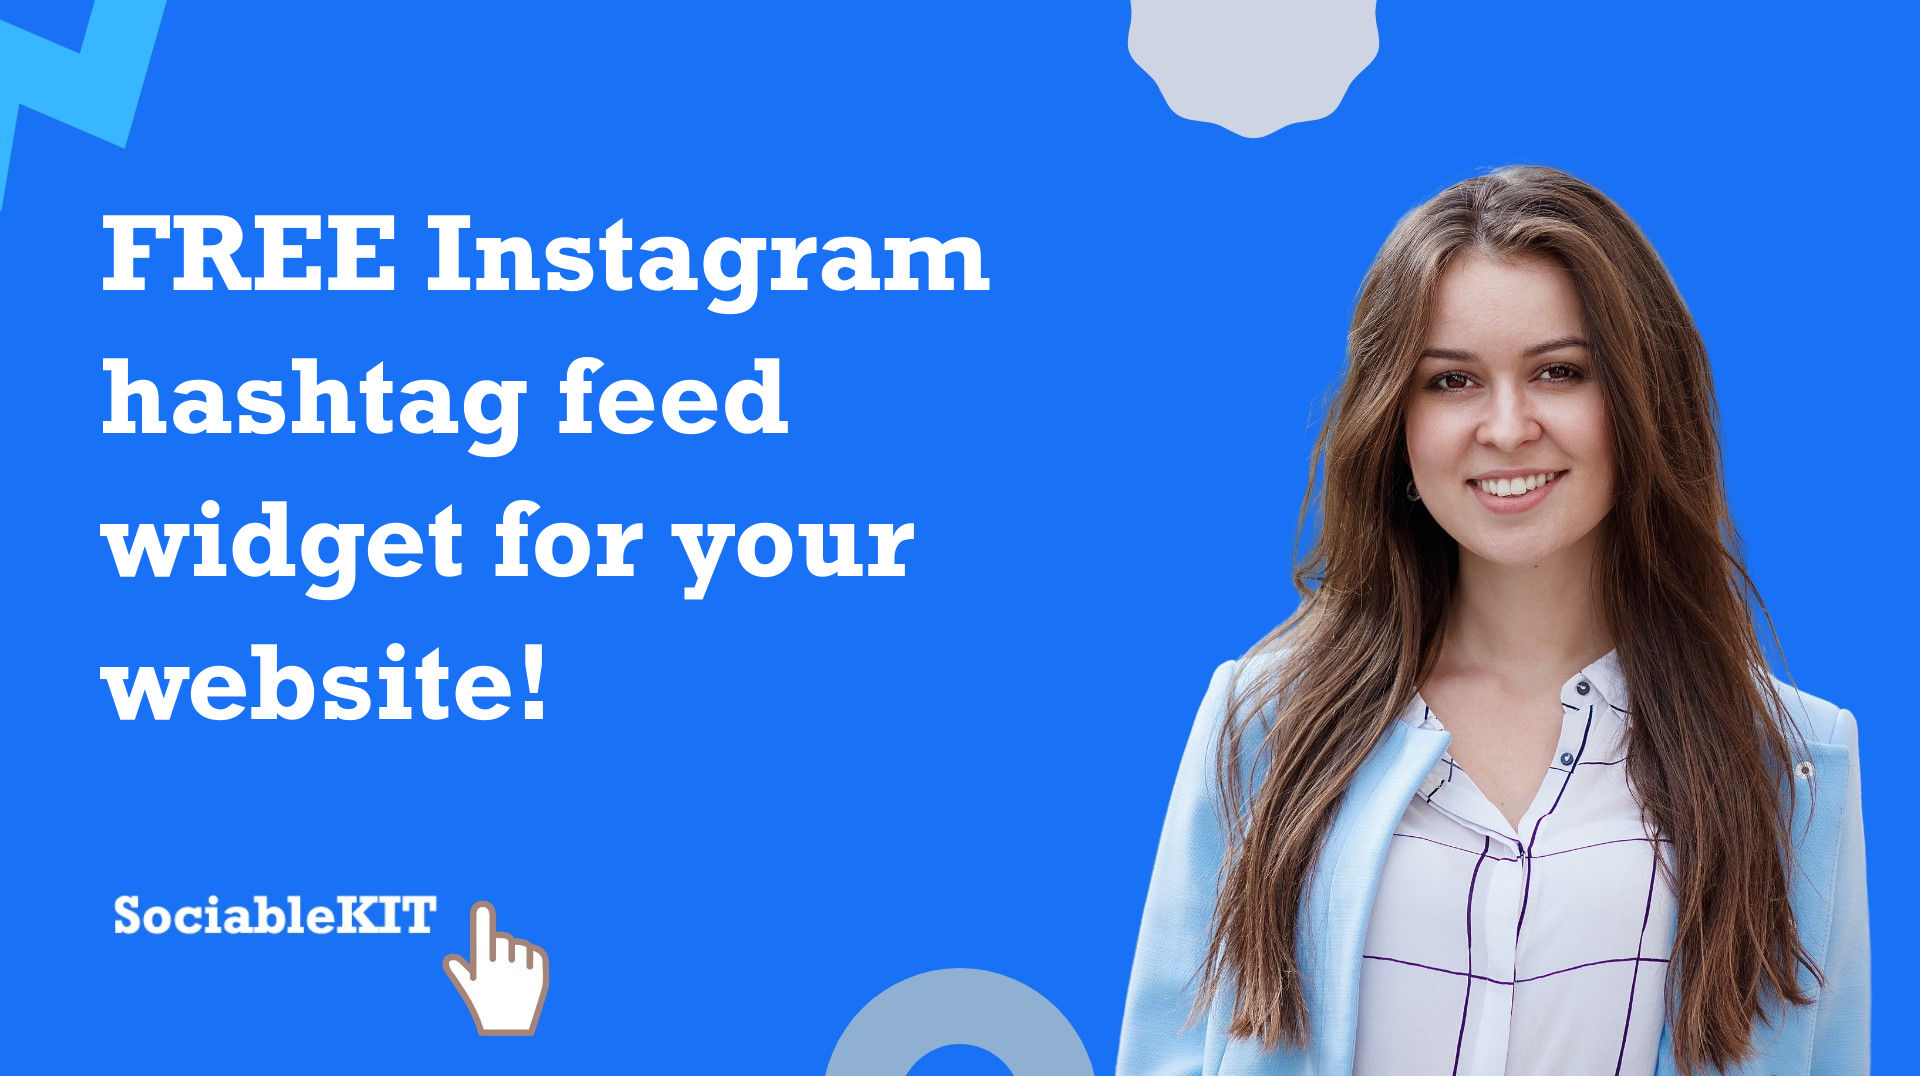 Free Instagram hashtag feed widget for your website